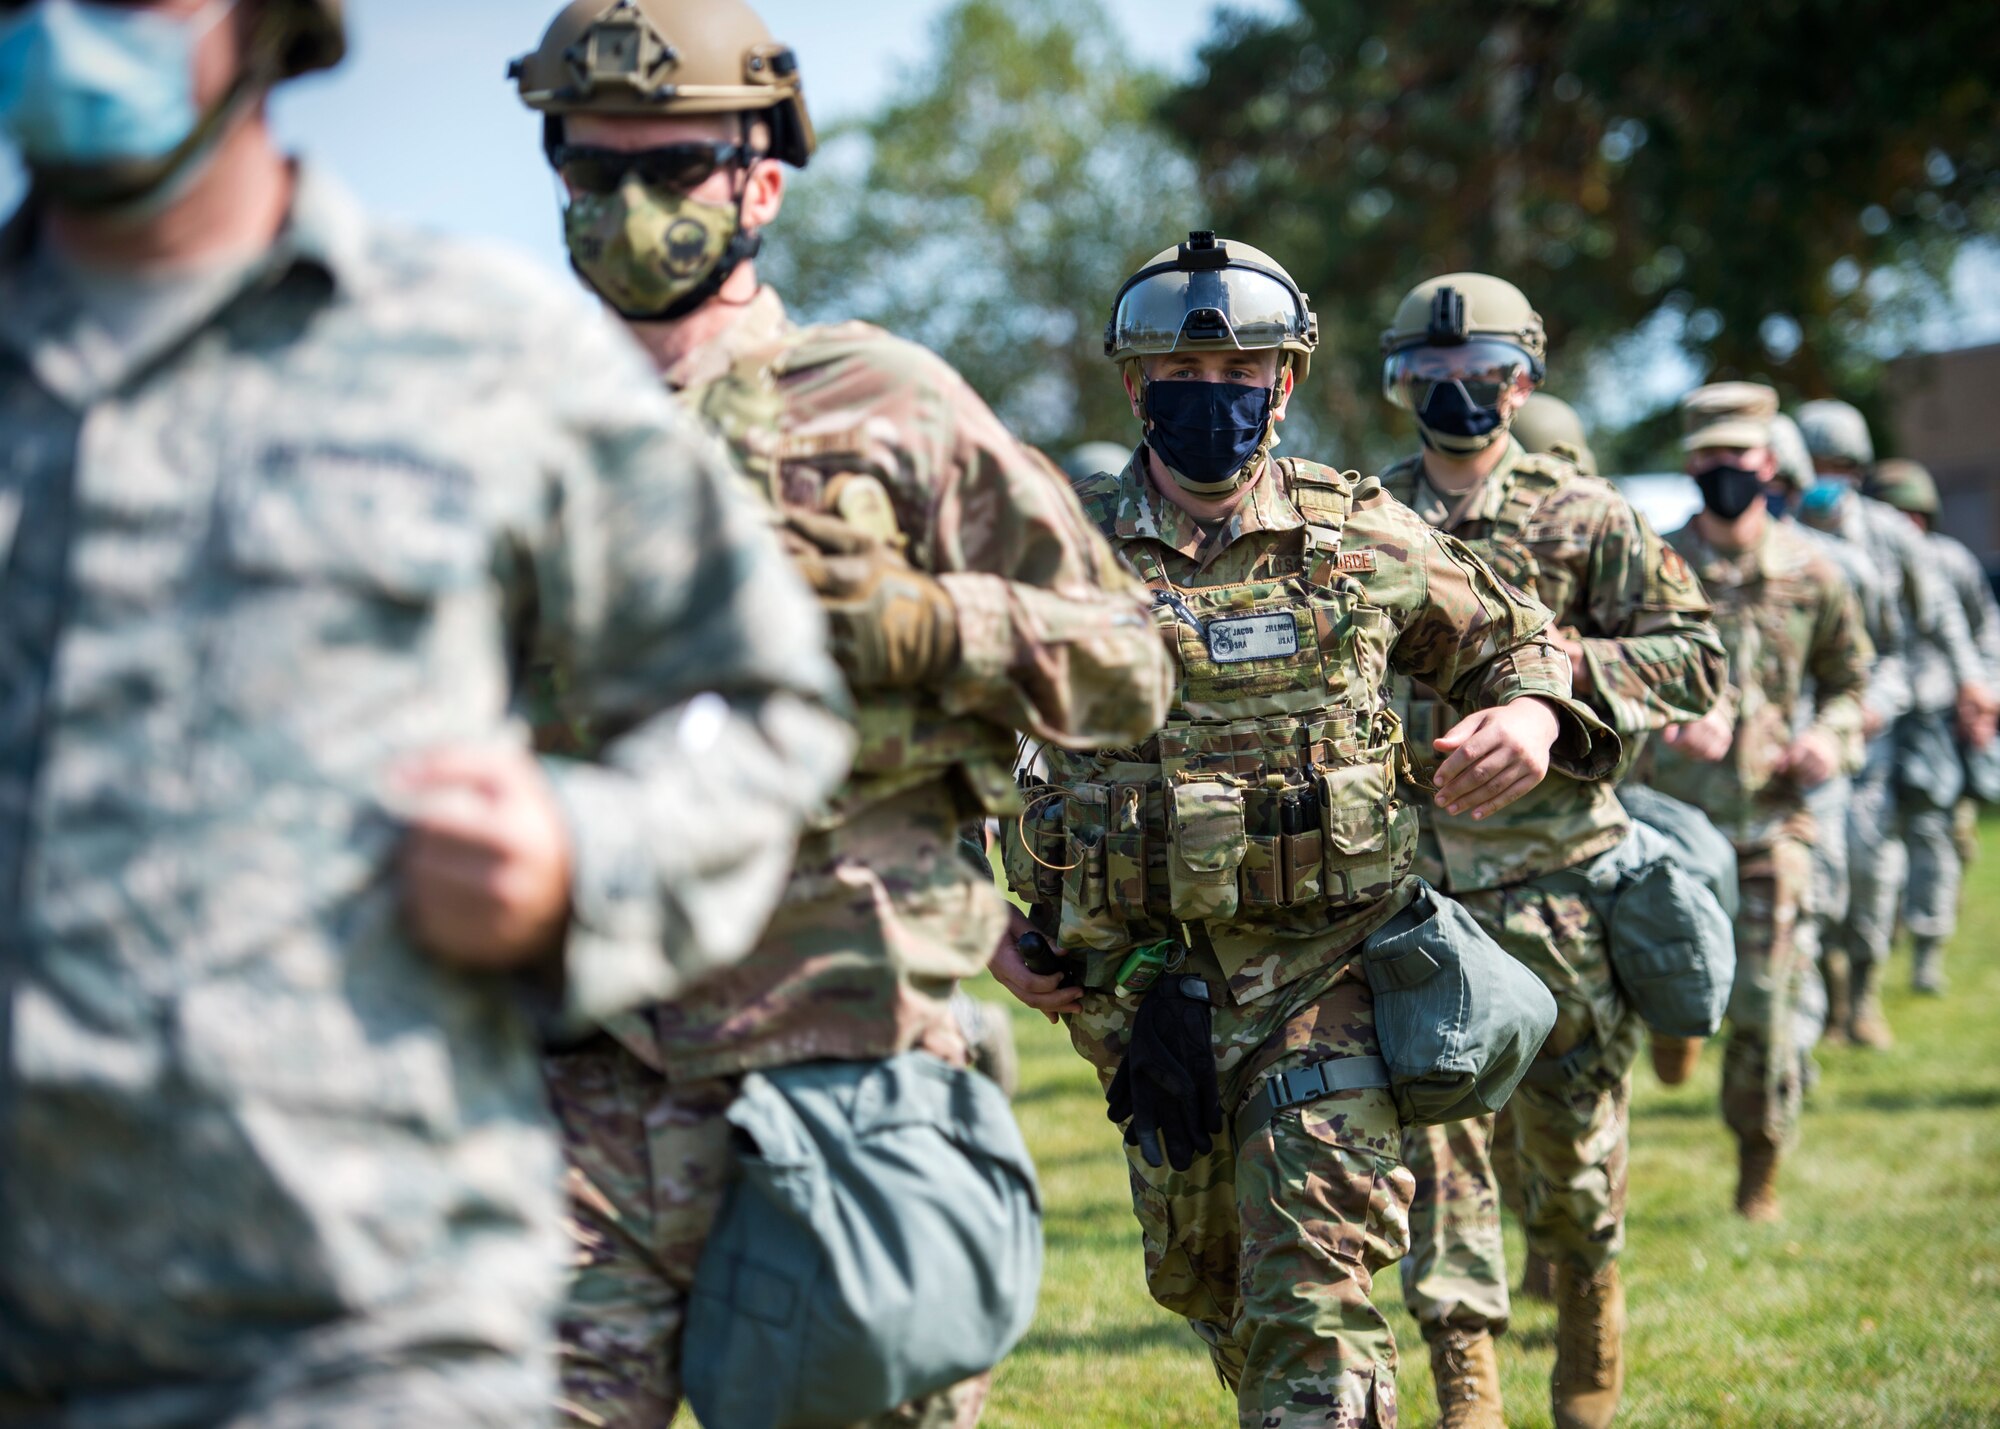 U.S. Air Force Airmen from the 133rd Airlift Wing participate in civil disturbance control training strengthening partnerships between local law enforcement and the Minnesota Air National Guard in St. Paul, Minn., Sept. 19, 2020.